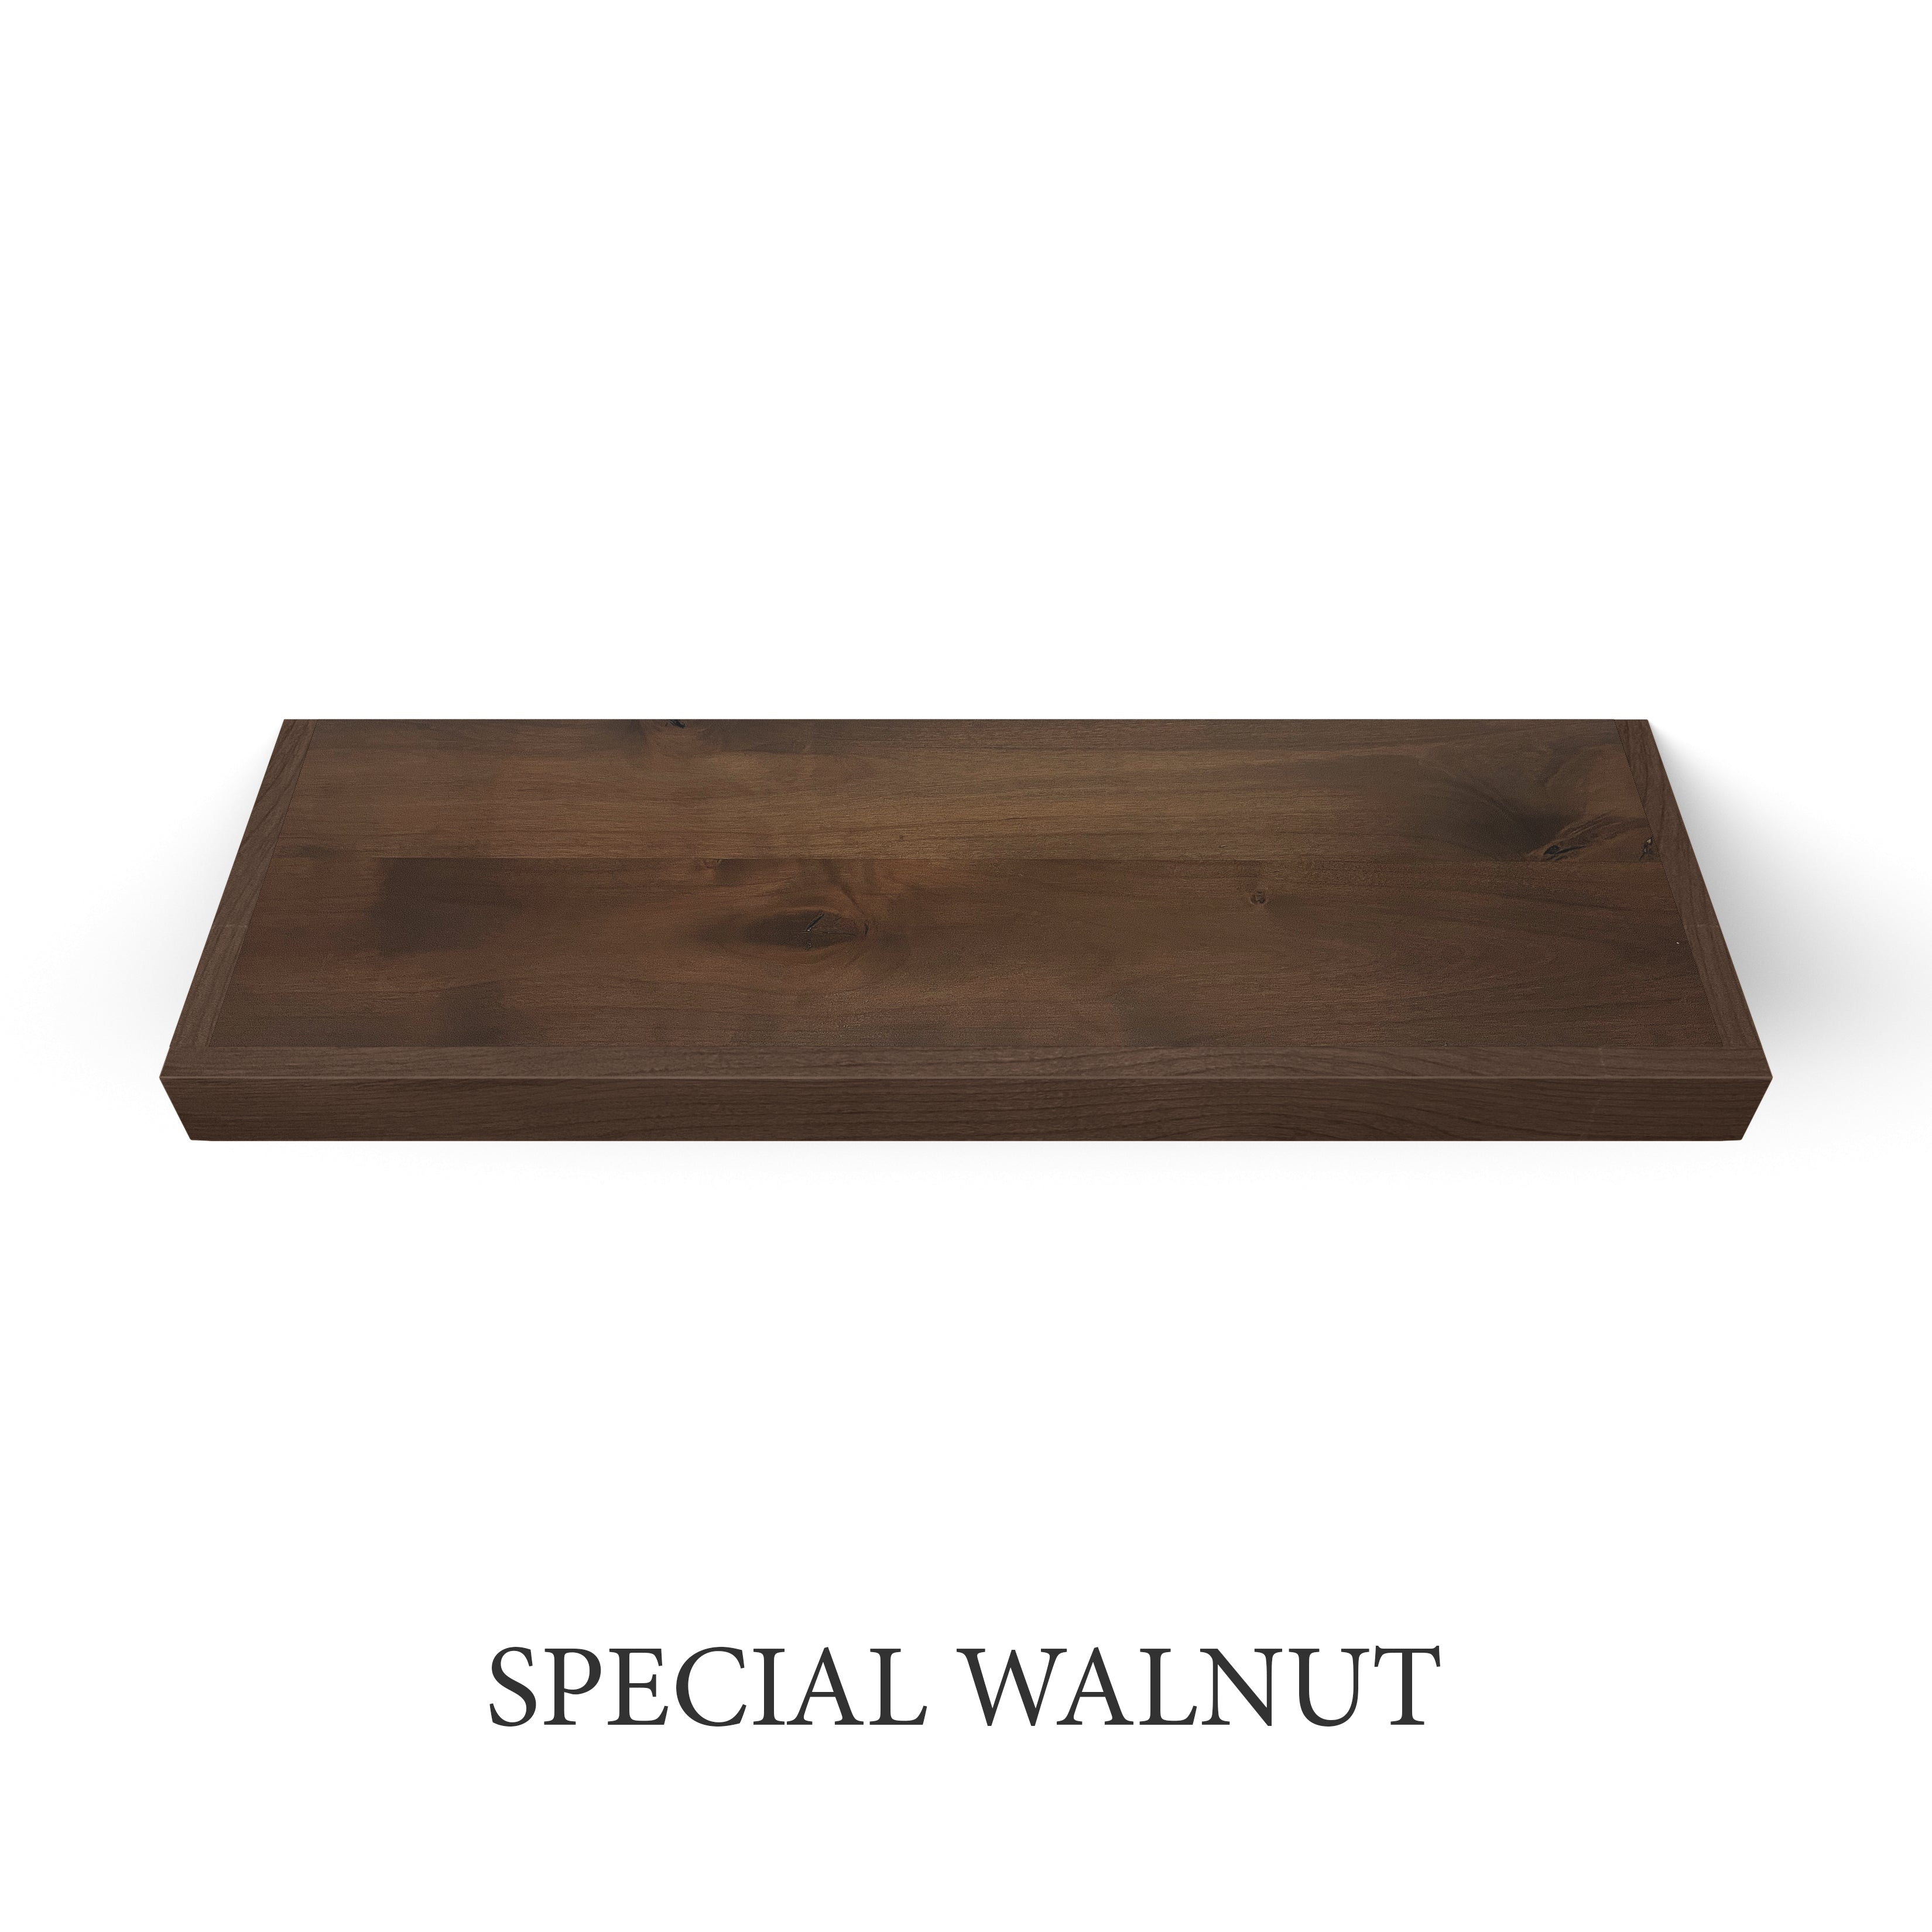 special walnut Rustic Alder 2 Inch Thick Floating Shelves